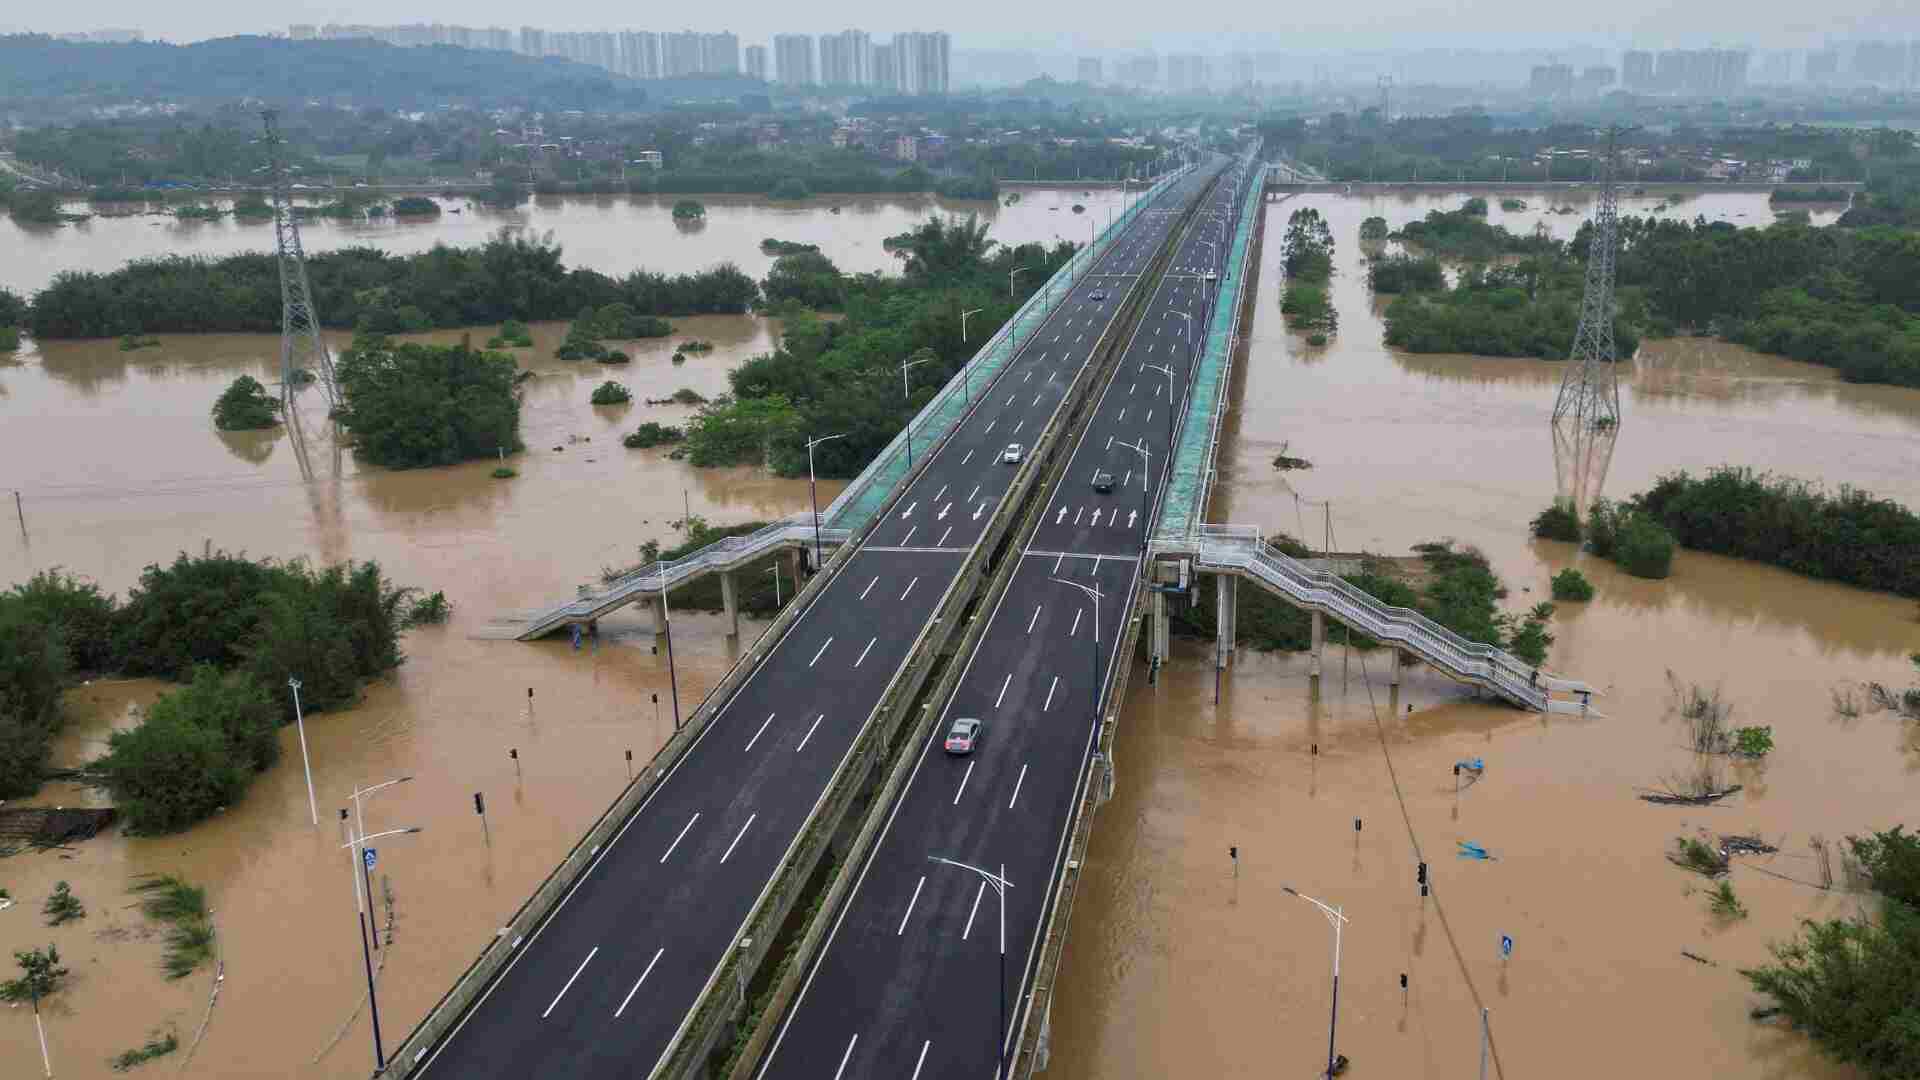 Southern China Facing Severe Floods